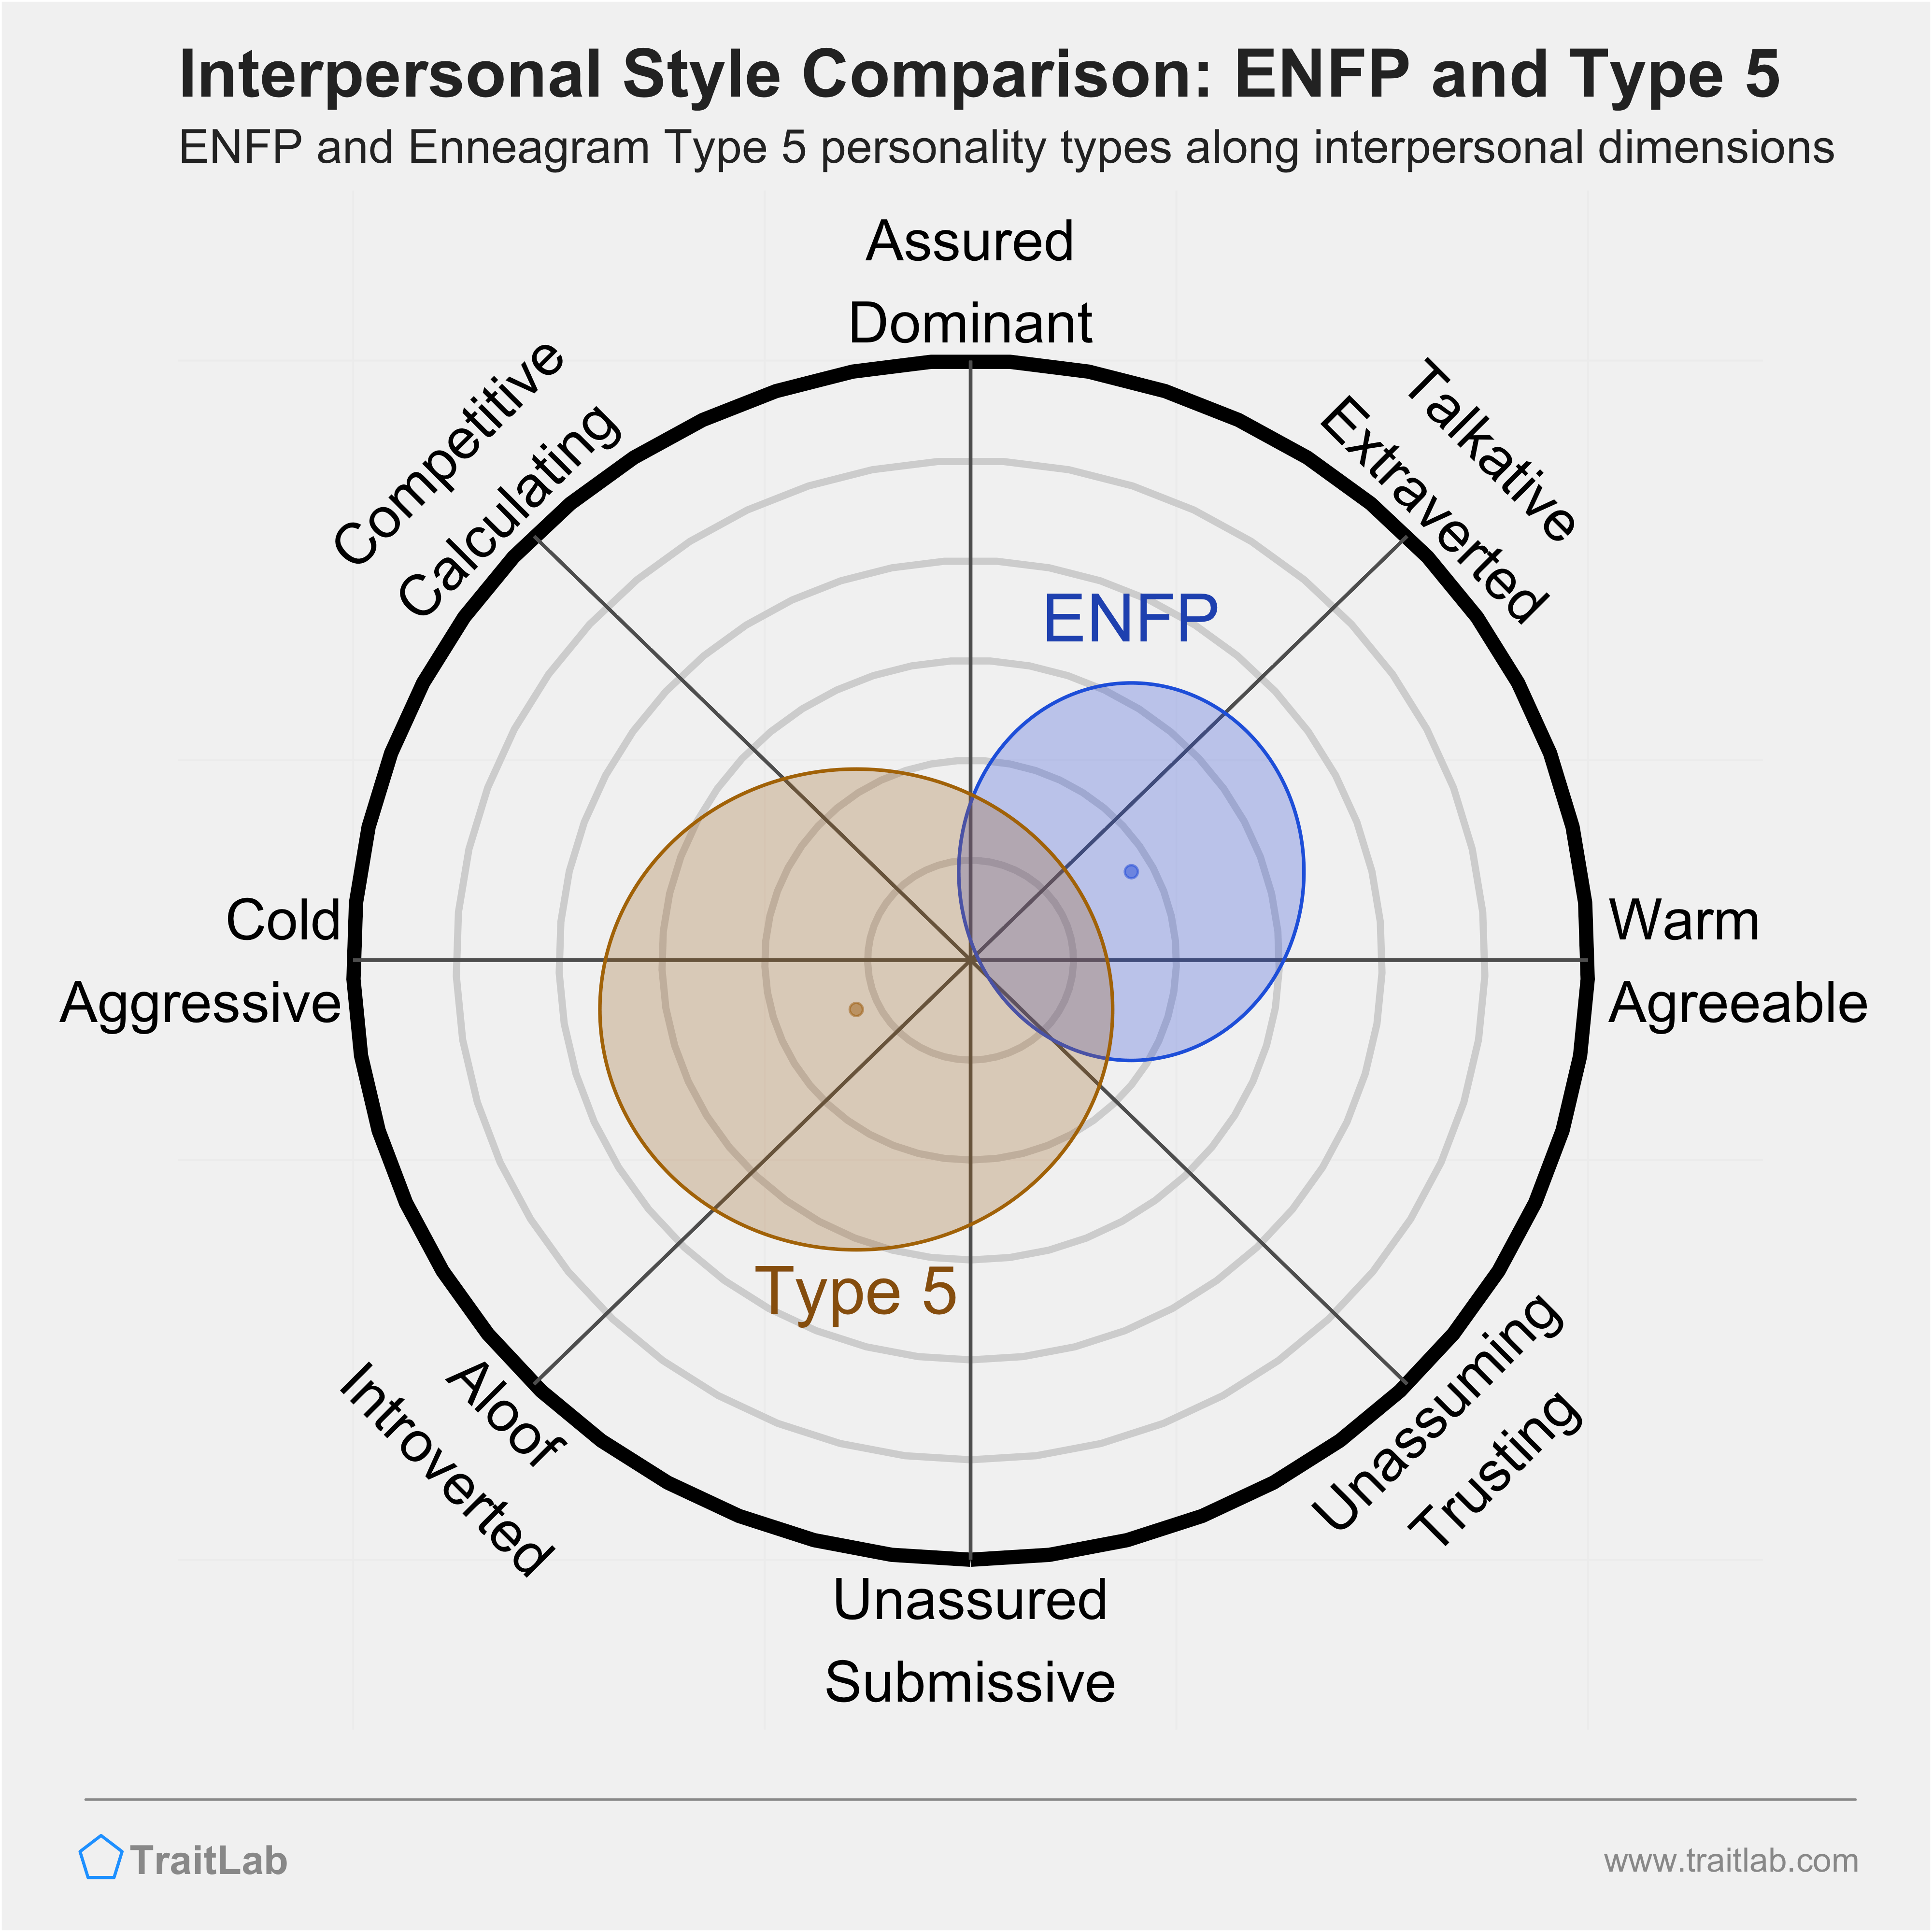 Enneagram ENFP and Type 5 comparison across interpersonal dimensions